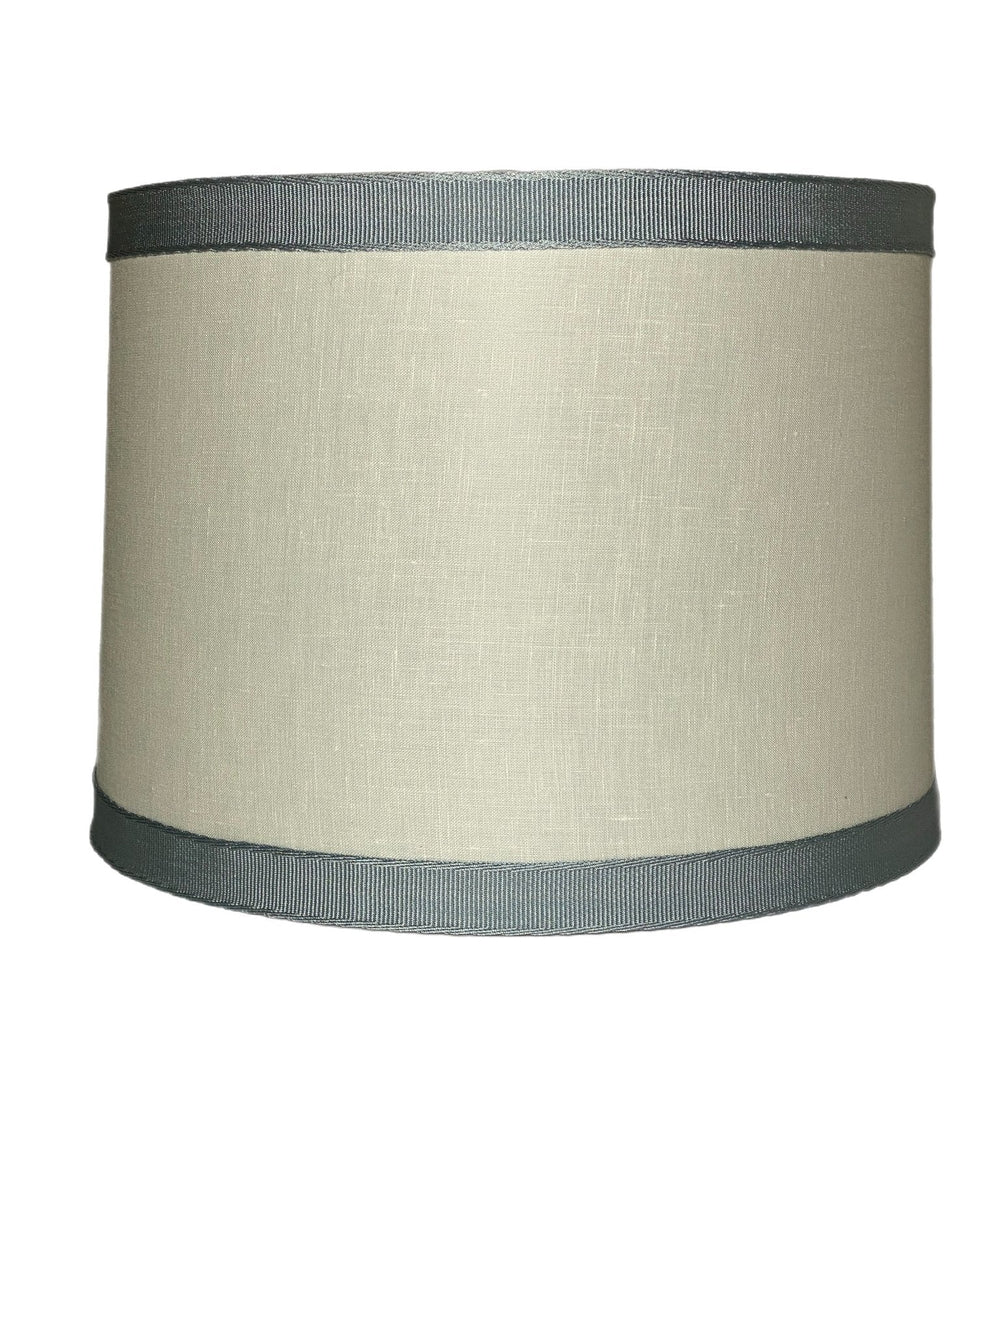 Linen Drum Harback Lamp Shade with Horizon Trim from Samuel and Sons - Lux Lamp Shades